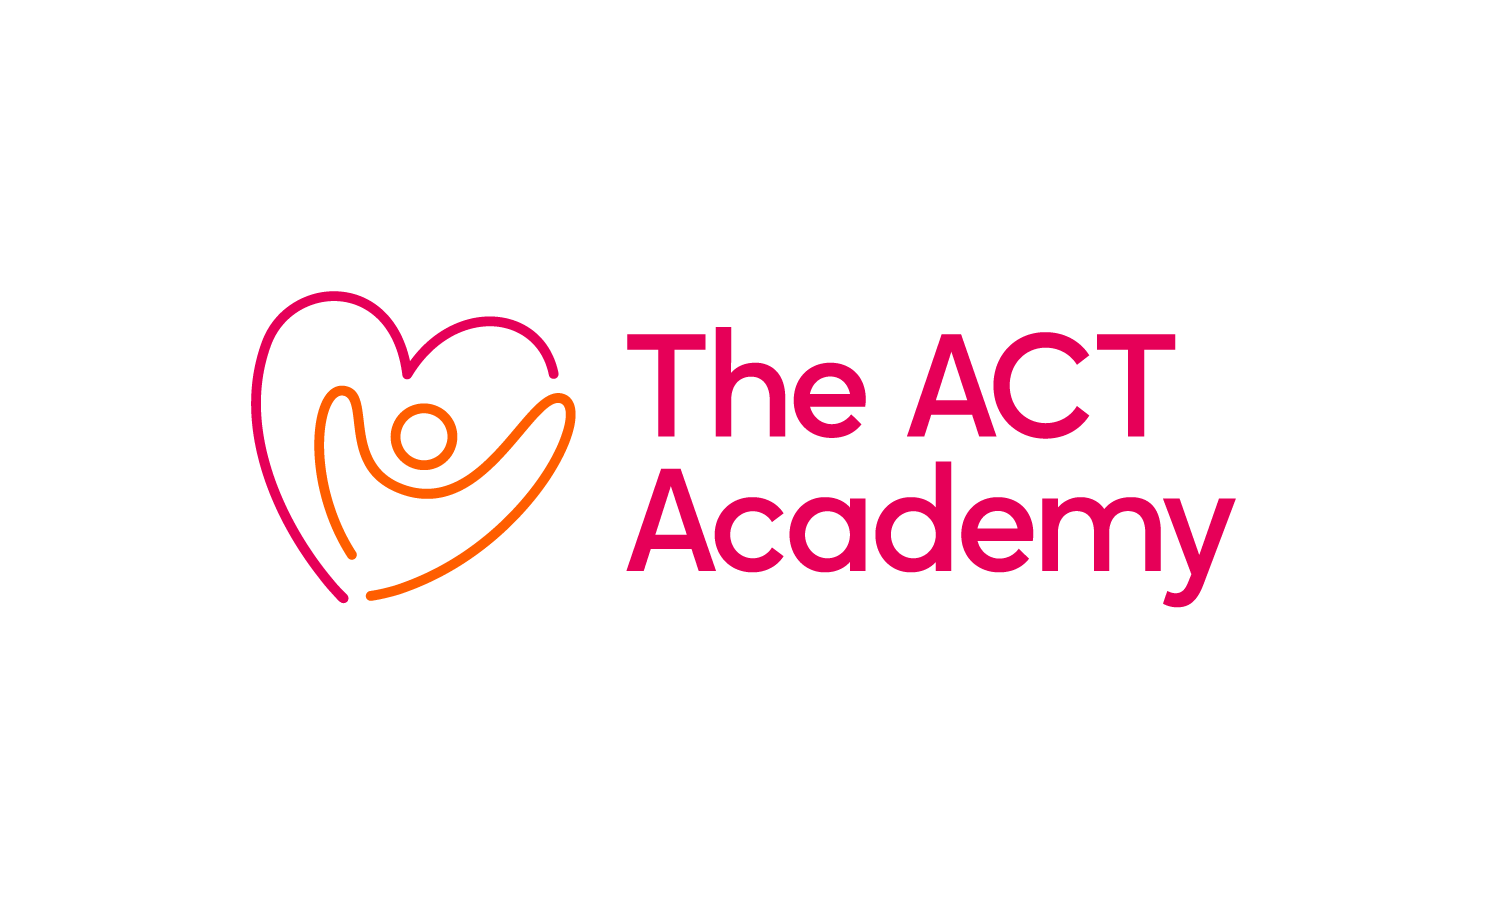 The ACT Academy